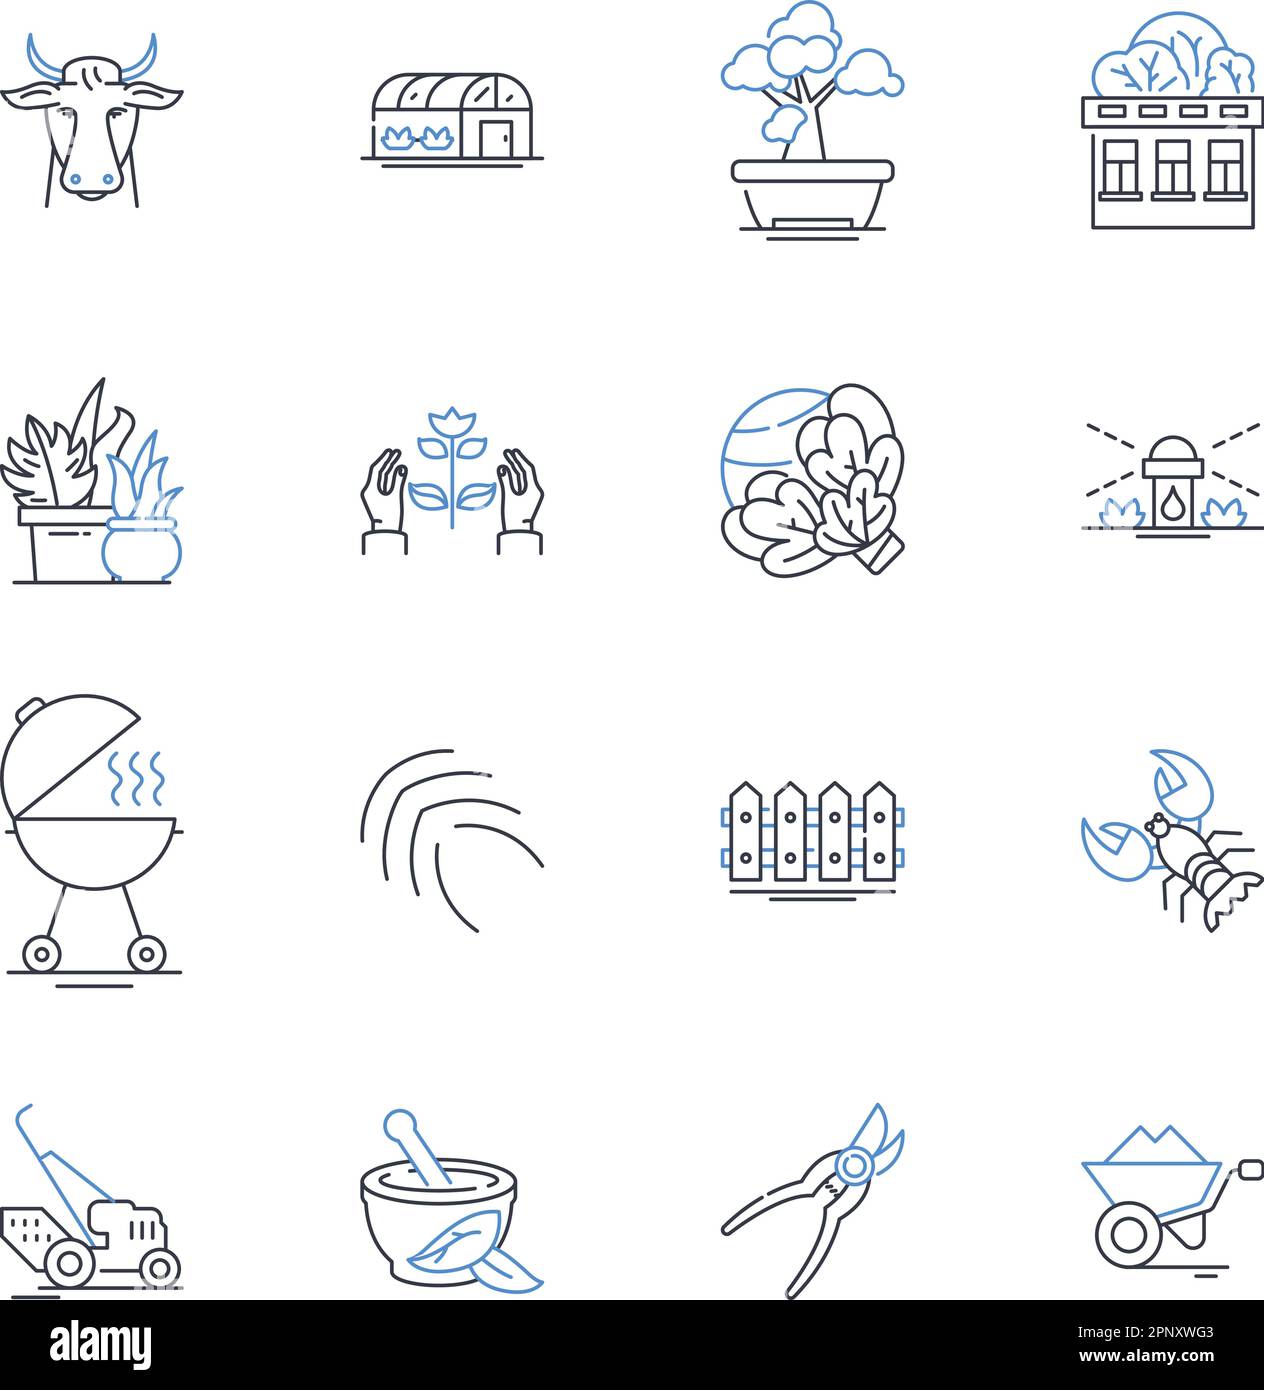 Media broadcasting line icons collection. Television, Radio, Podcasts, Streaming, Live, Broadcast, News vector and linear illustration. Entertainment Stock Vector